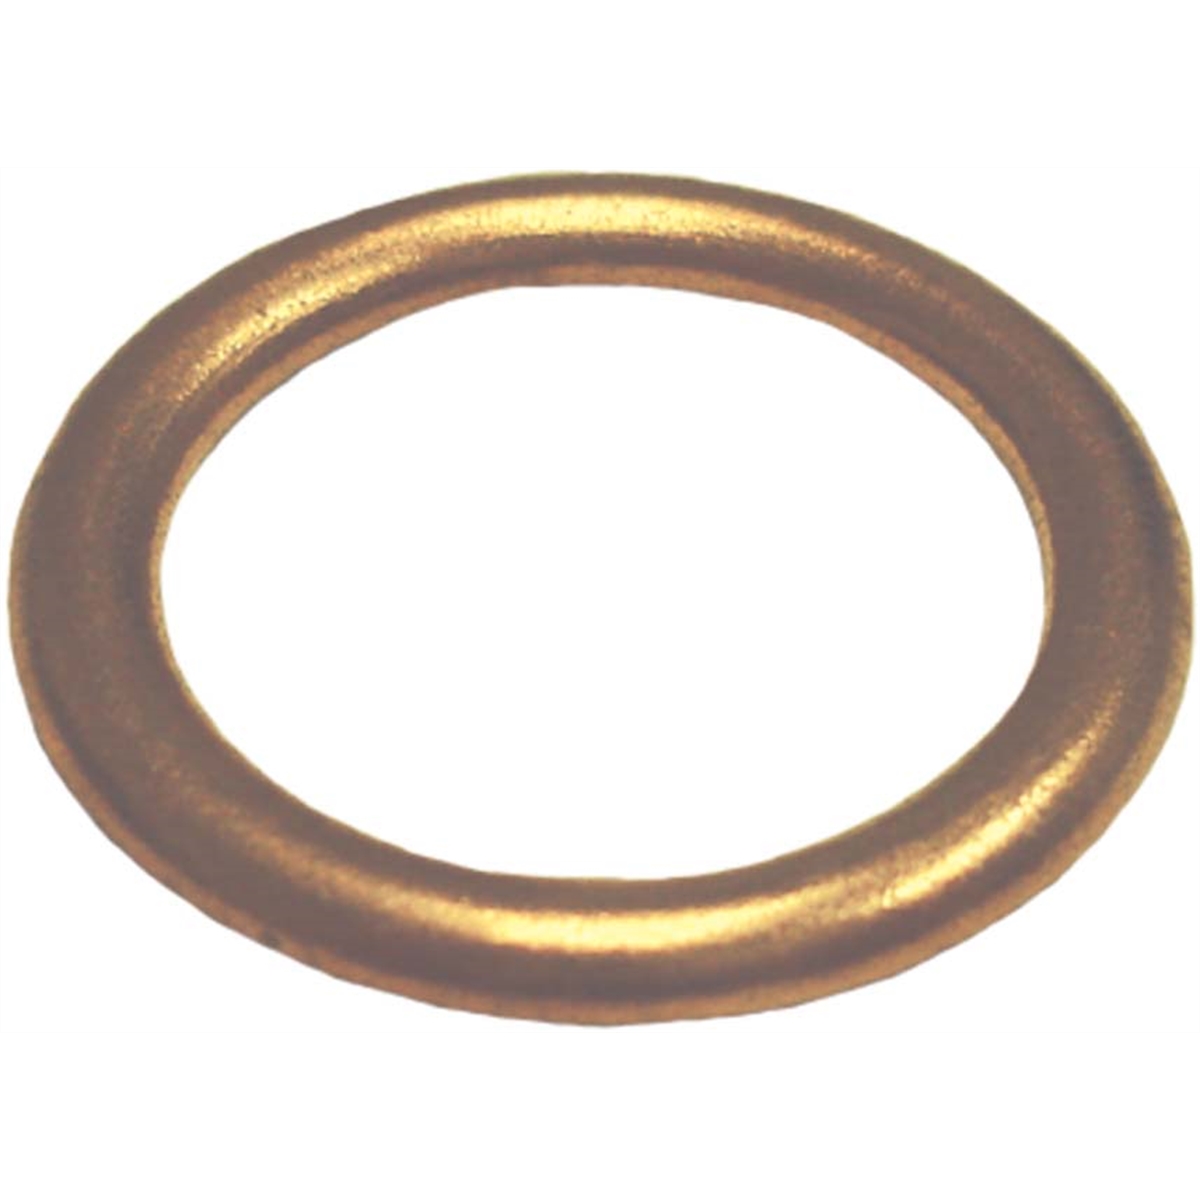 22mm Copper Crushable Gasket